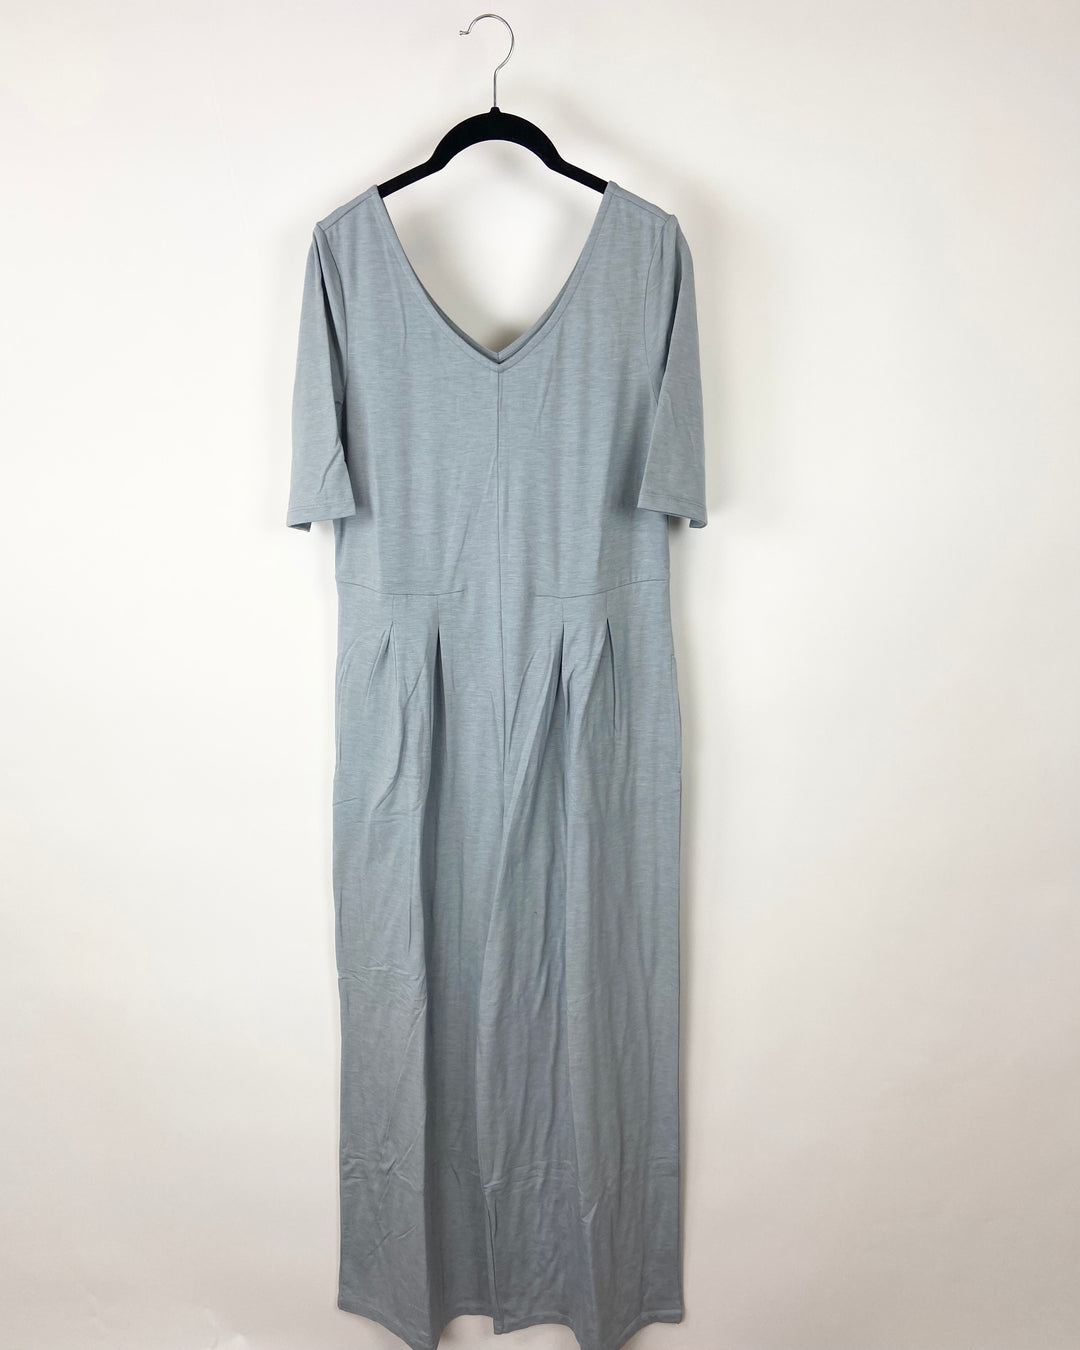 Light Blue Jumpsuit - Extra Small/Small